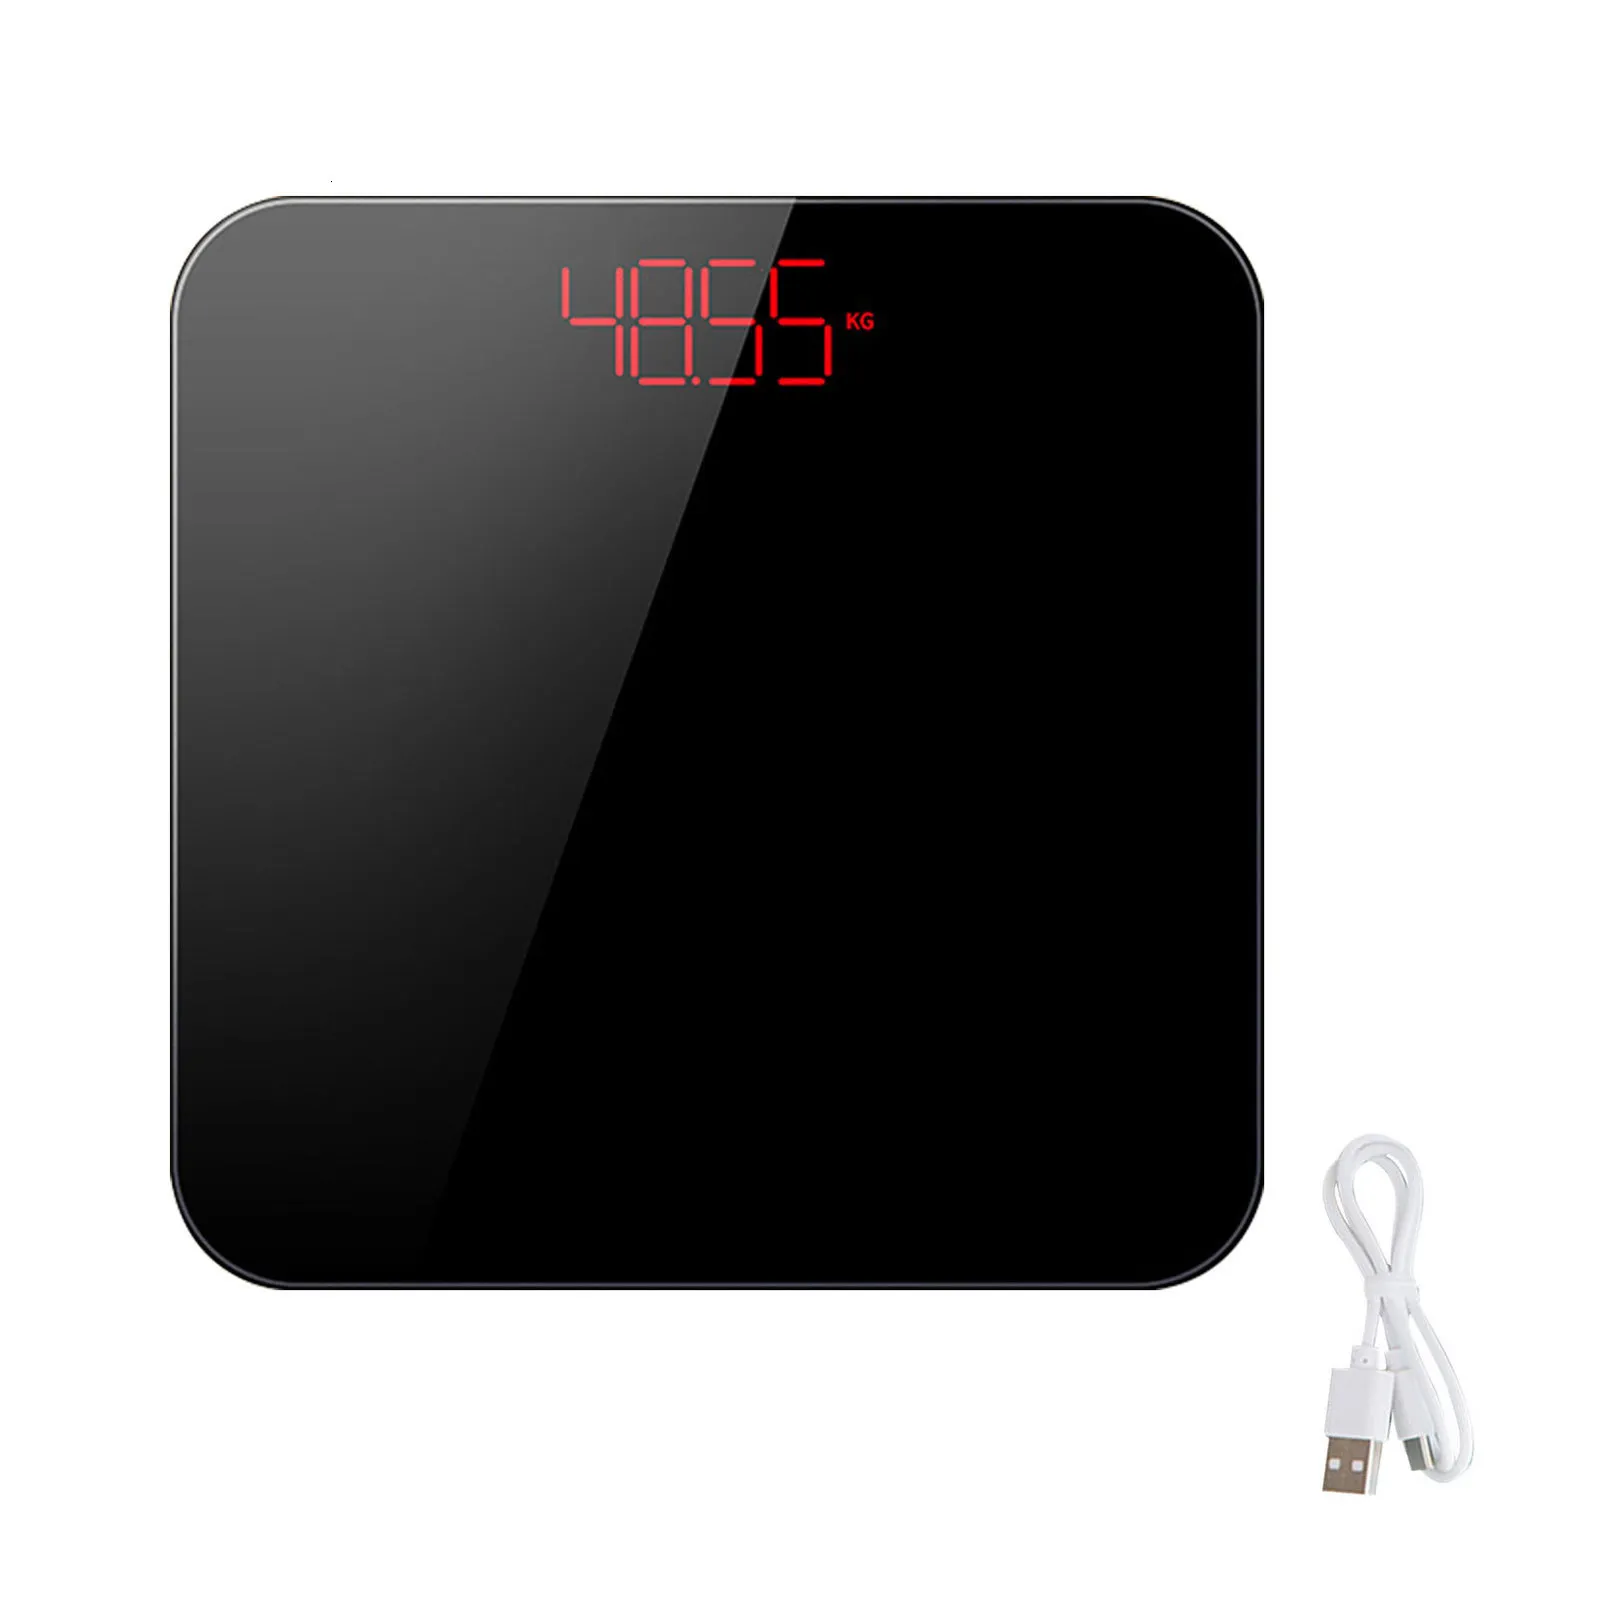 Body Weight Scales Lightweight Home Gym Slim USB Rechargeable 180kg Tempered Glass Body Weight Practical Digital Display Universal Bathroom Scale 230308